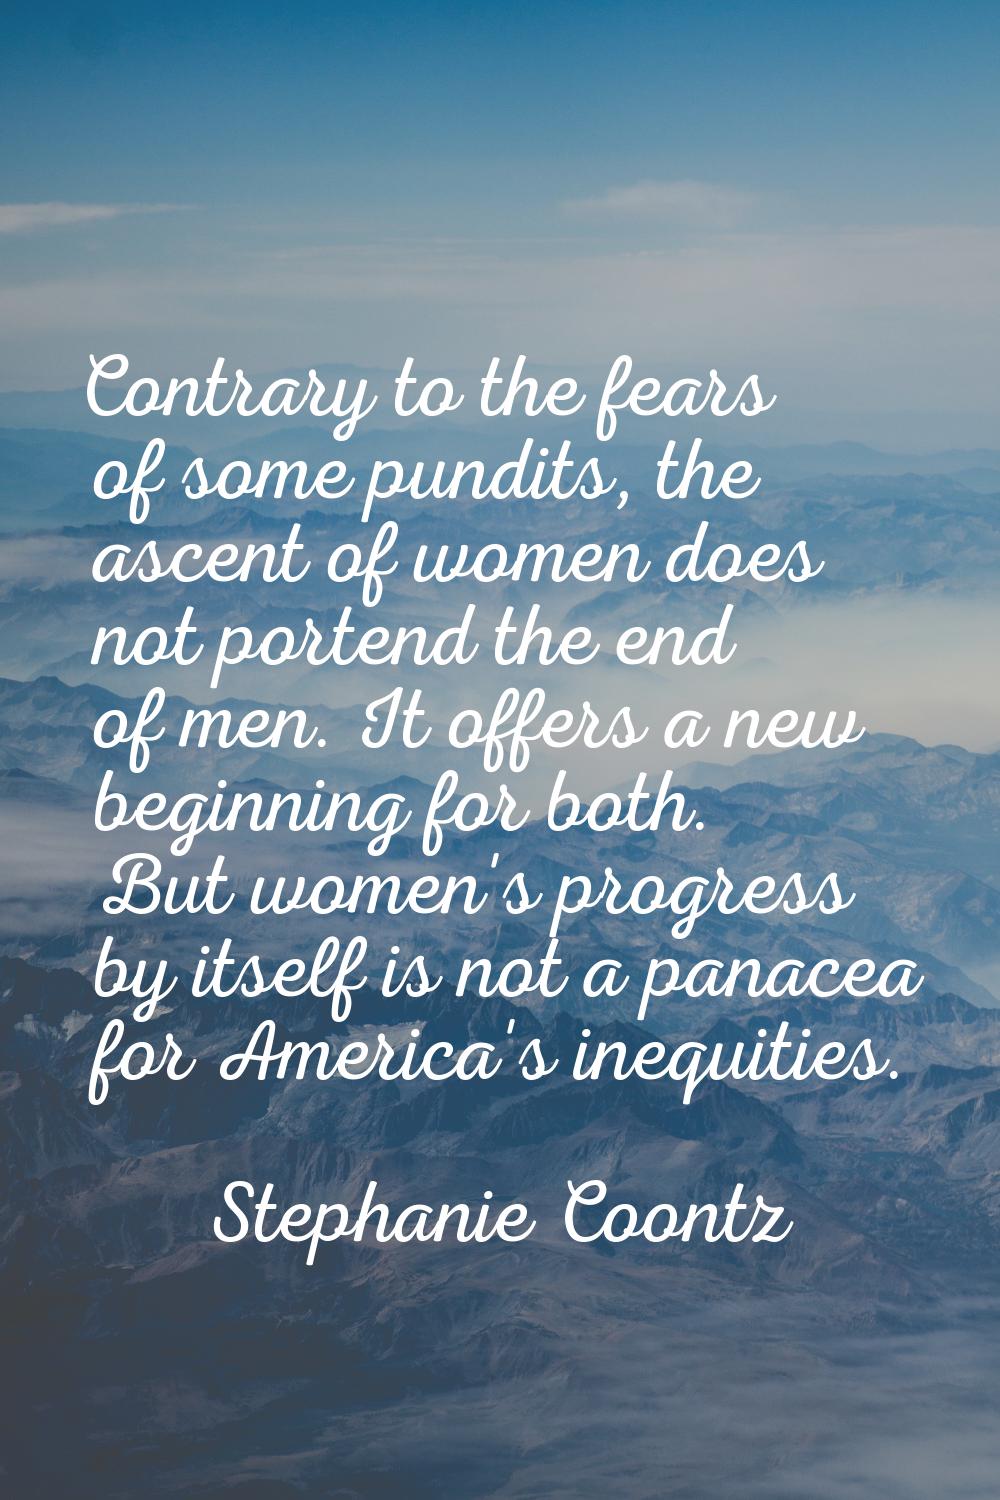 Contrary to the fears of some pundits, the ascent of women does not portend the end of men. It offe